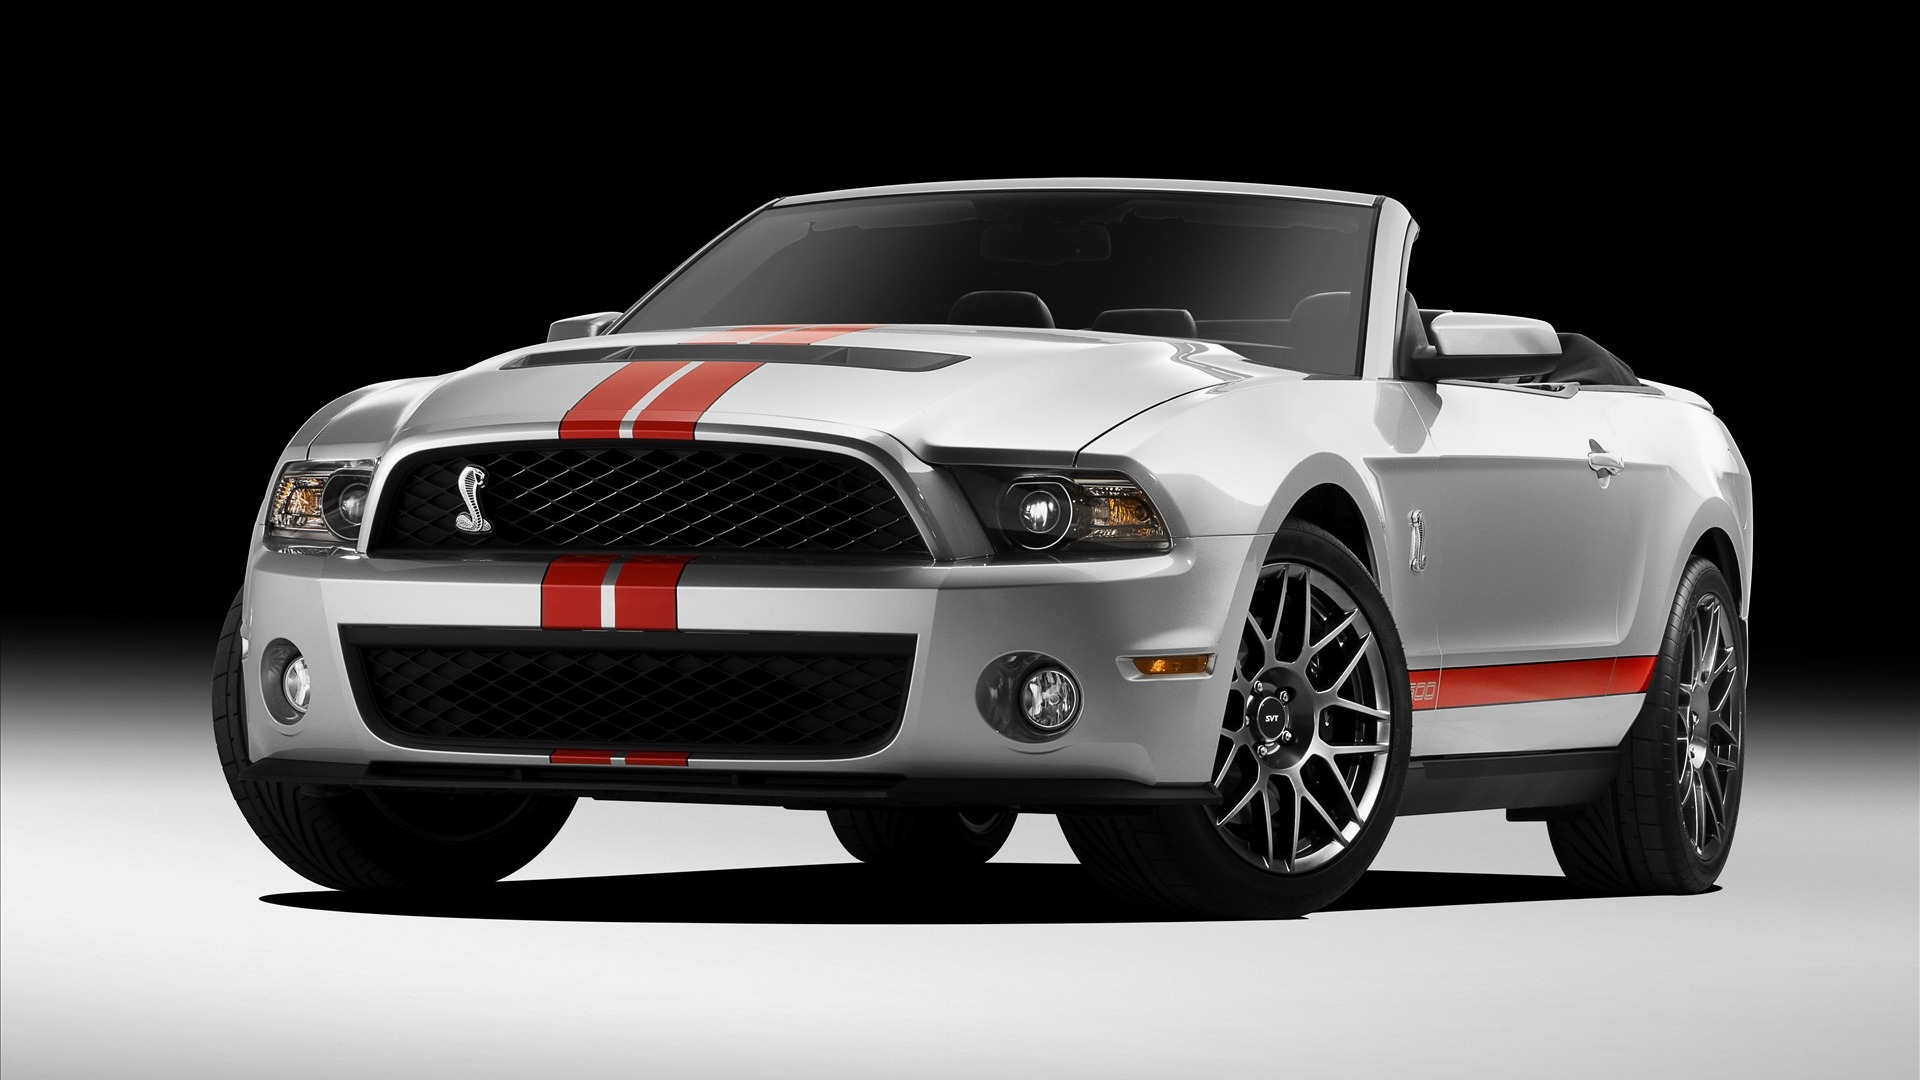 Ford Mustang GT500 Wallpapers #4 - 1920x1080